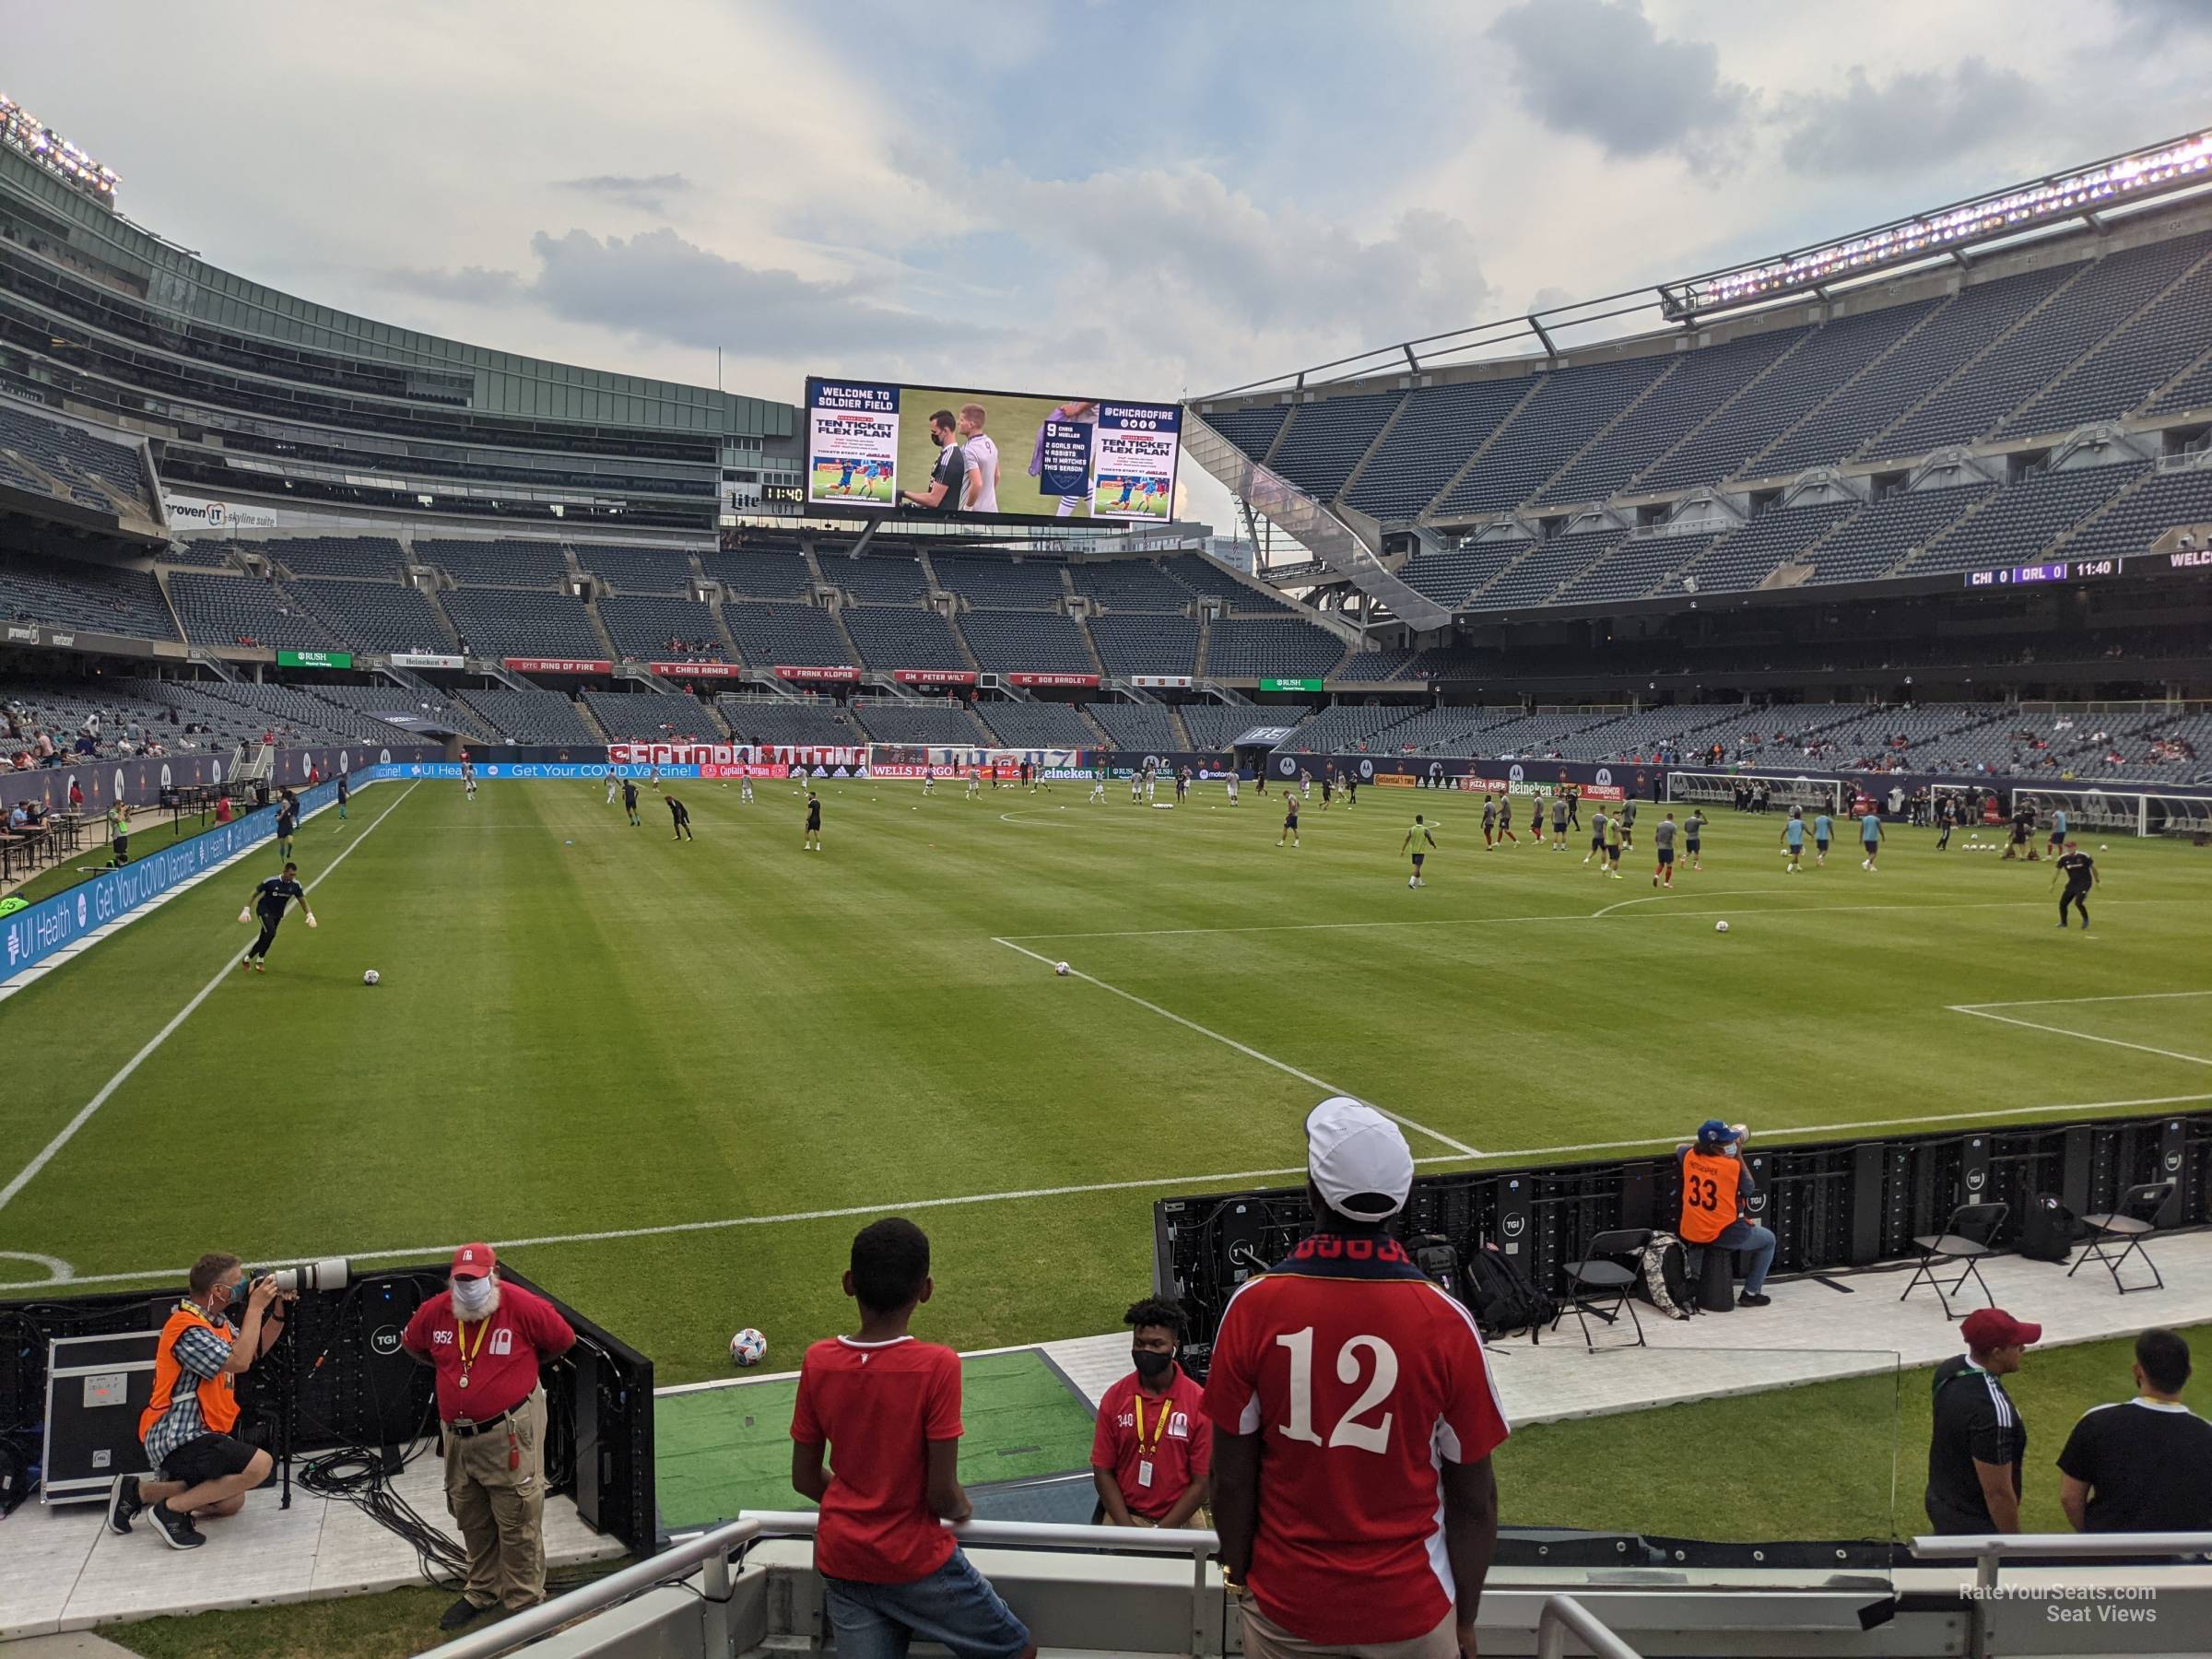 section 155, row 4 seat view  for soccer - soldier field